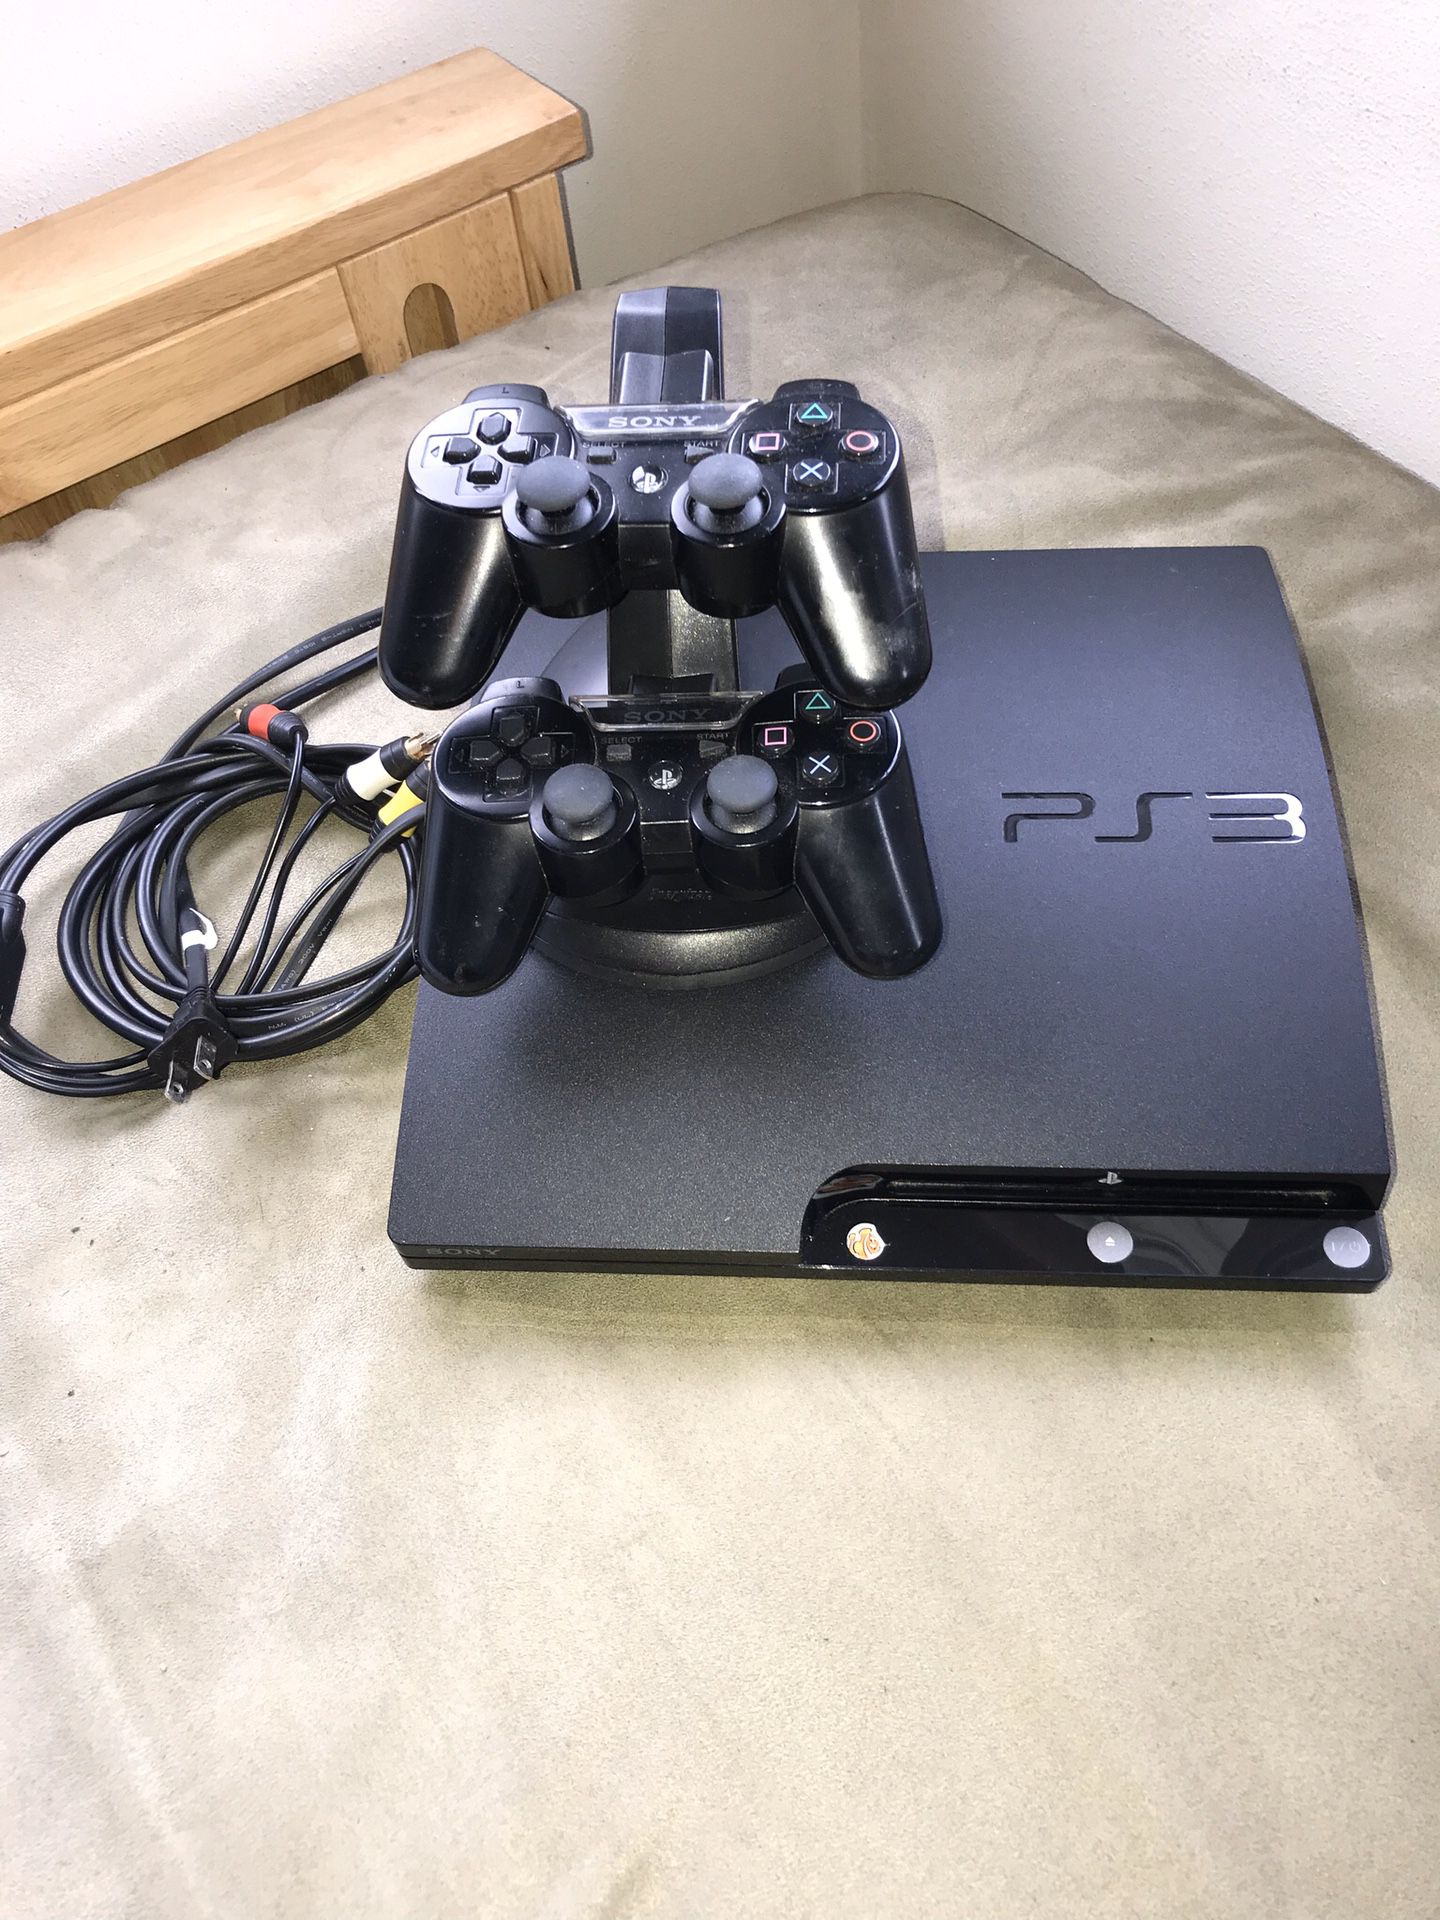 Sony Play Station P3 w/2 controllers, stand & Cables